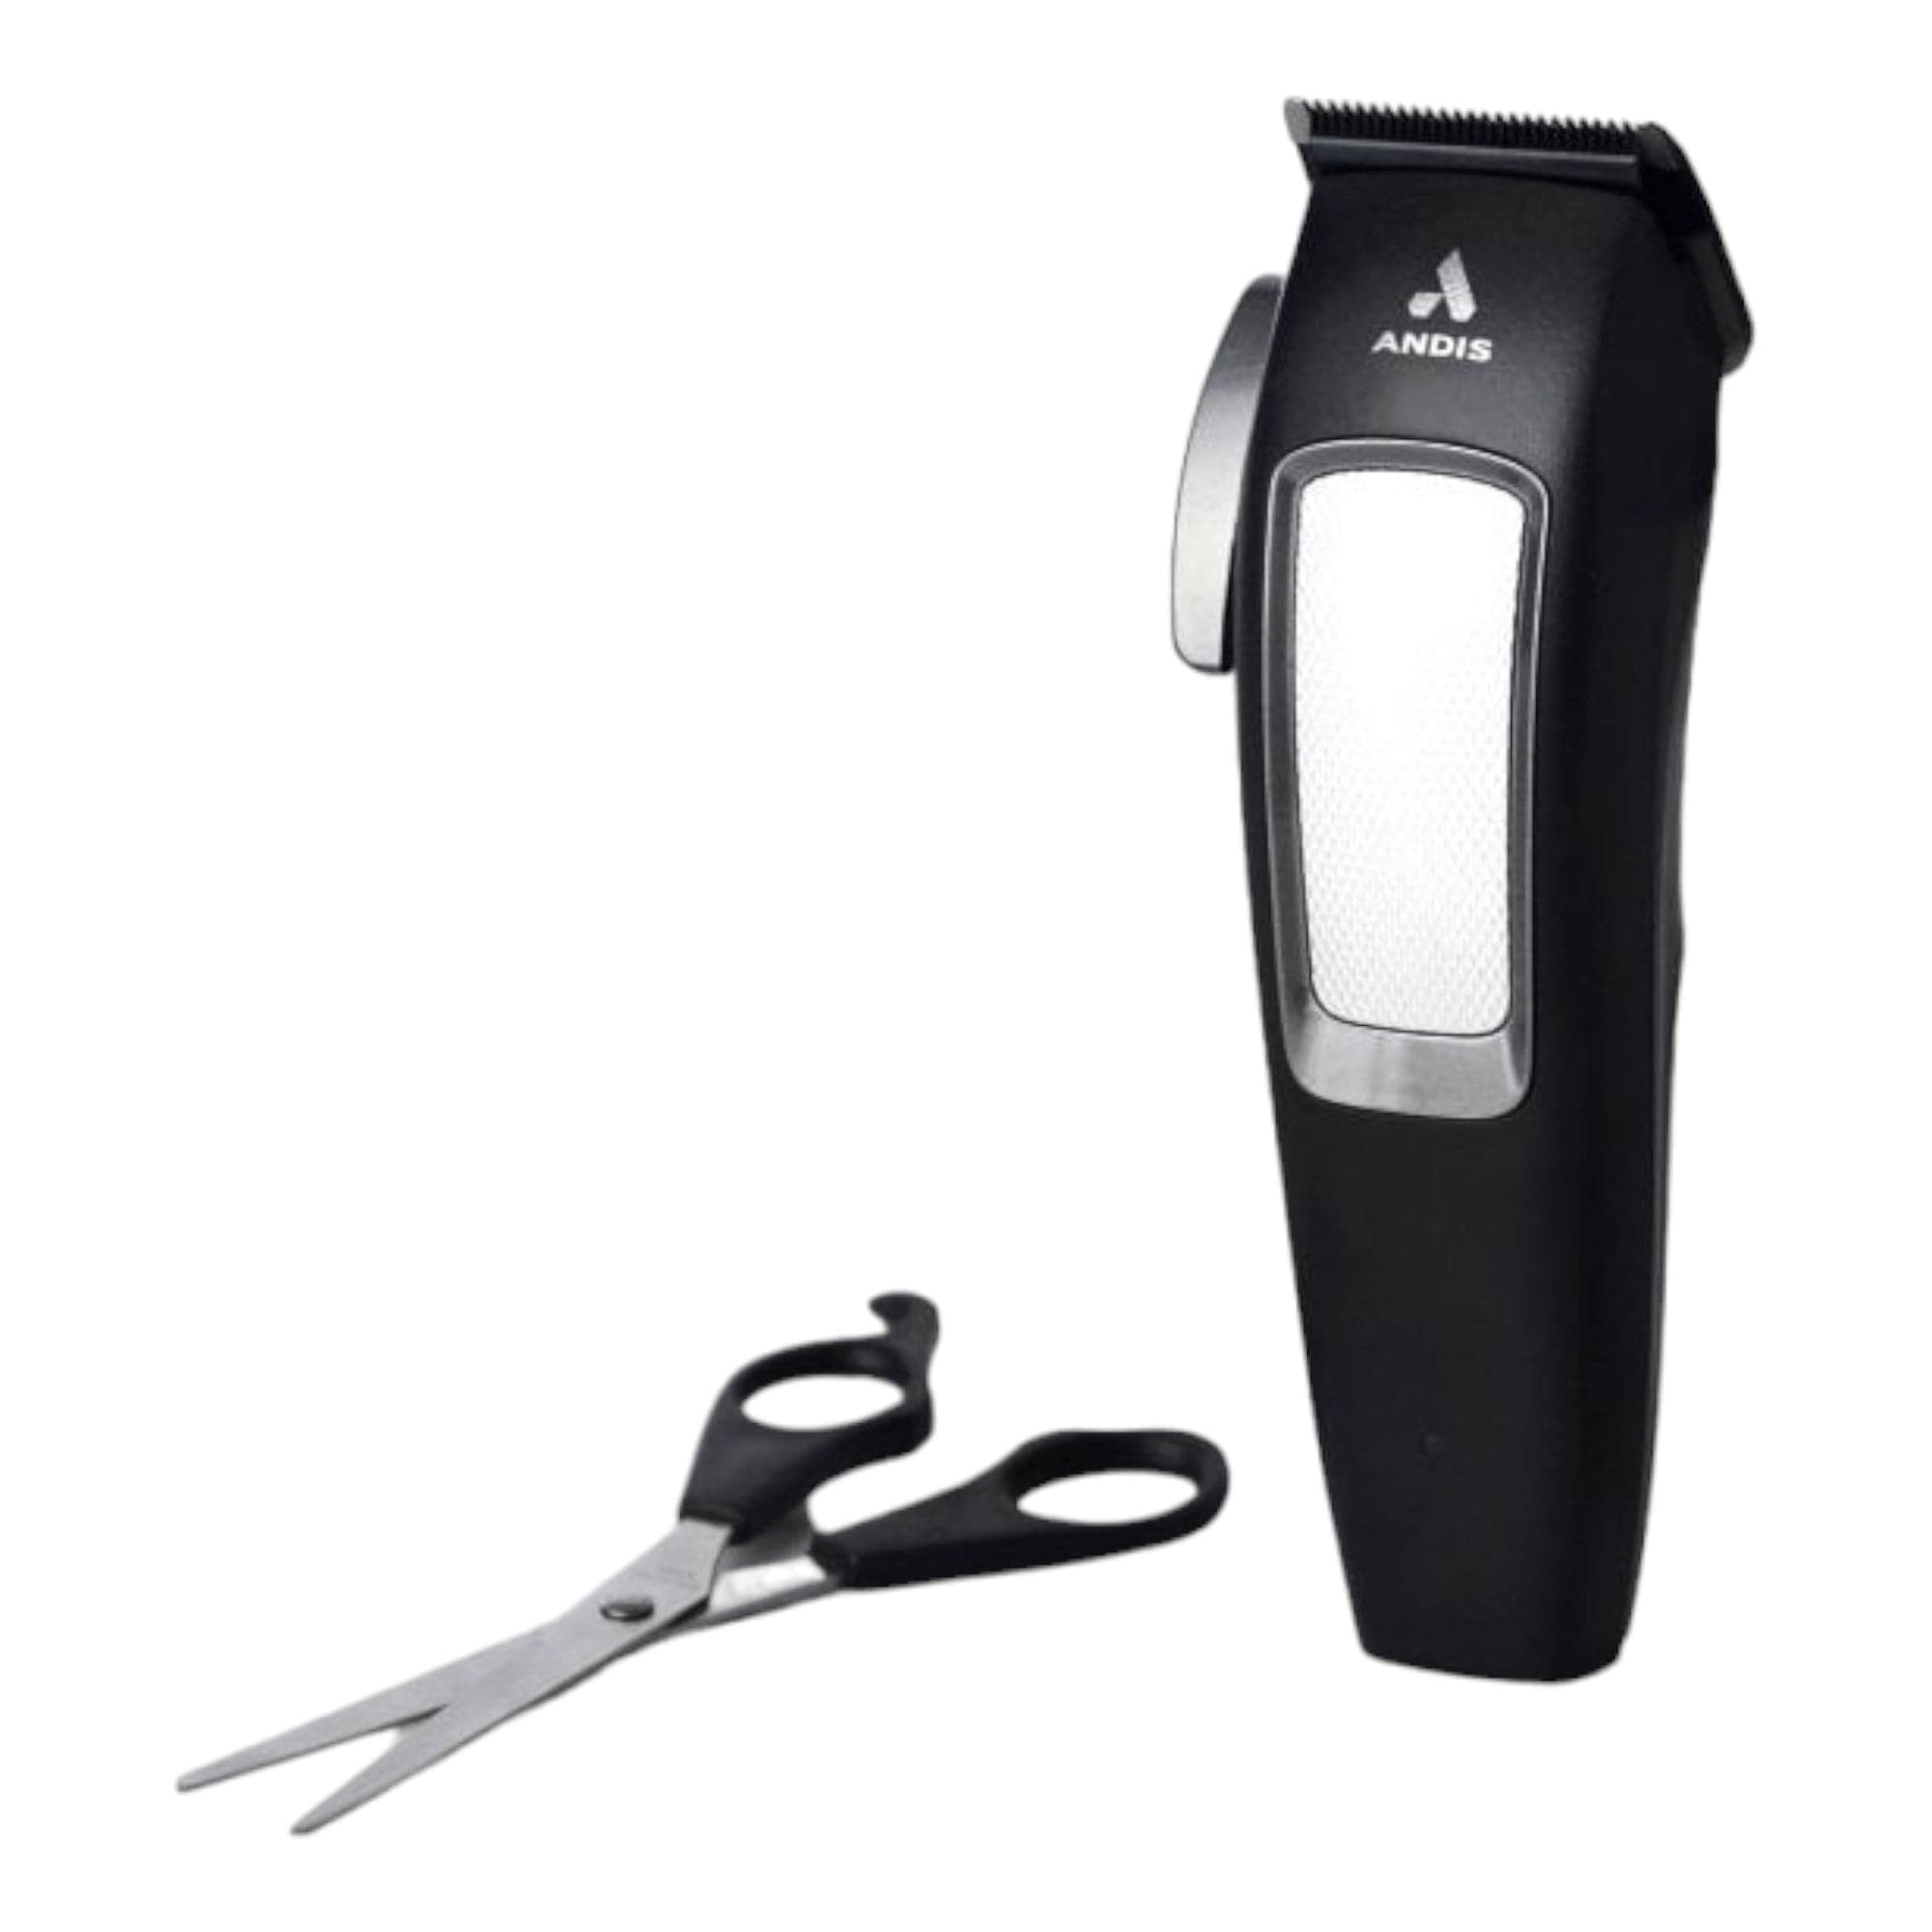 Andis - inCRED Lithium-ion Cordless Clipper 560585